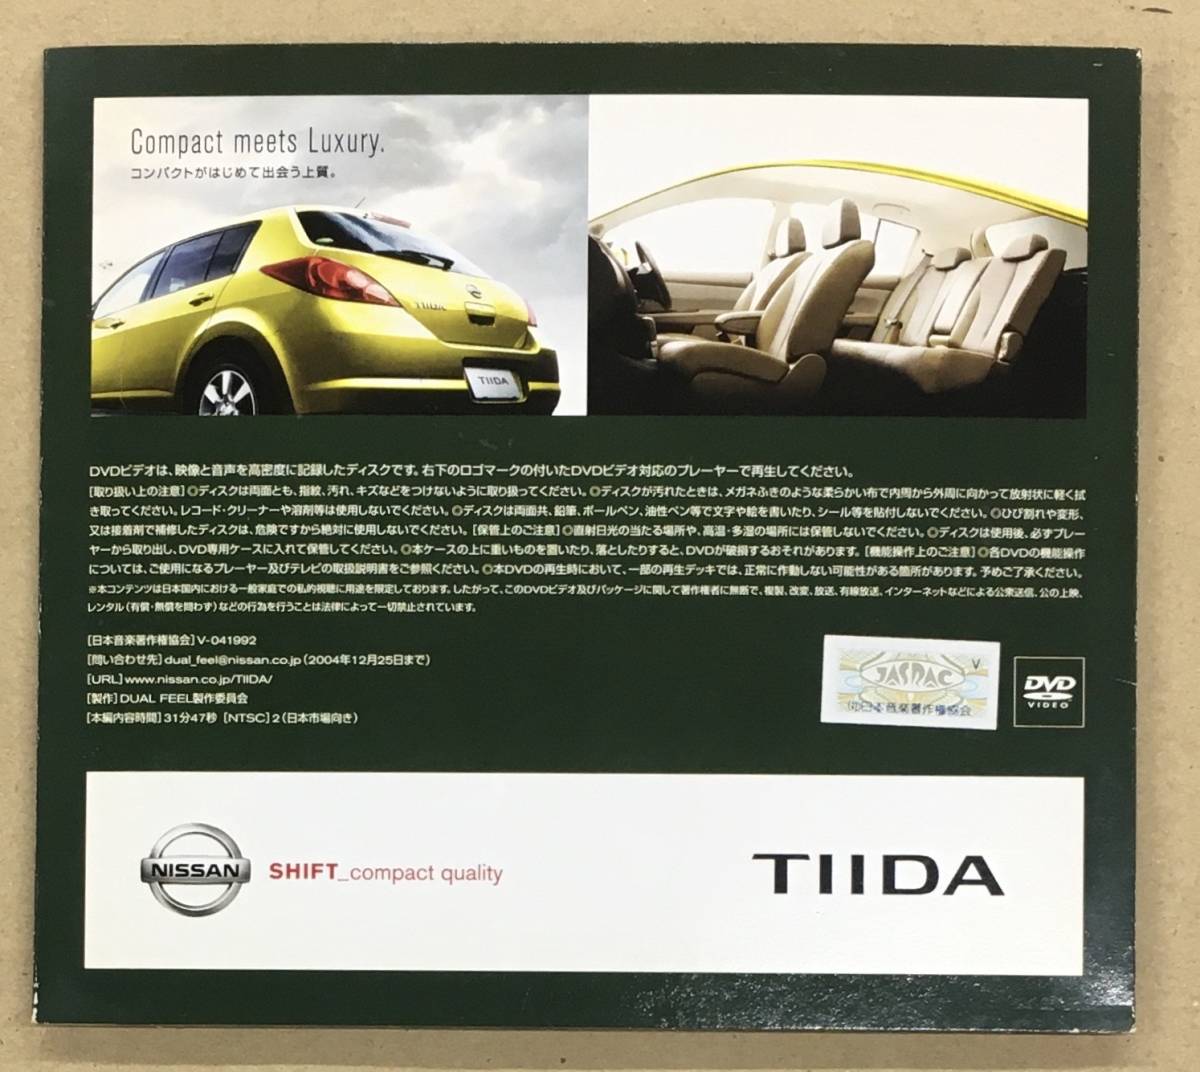 DUAL FEEL - CHAR small west genuine . beautiful DVD...h-2030 Nissan Tiida Pro motion video NISSAN TIIDA PRESENTS tea - bamboo middle furthermore person 